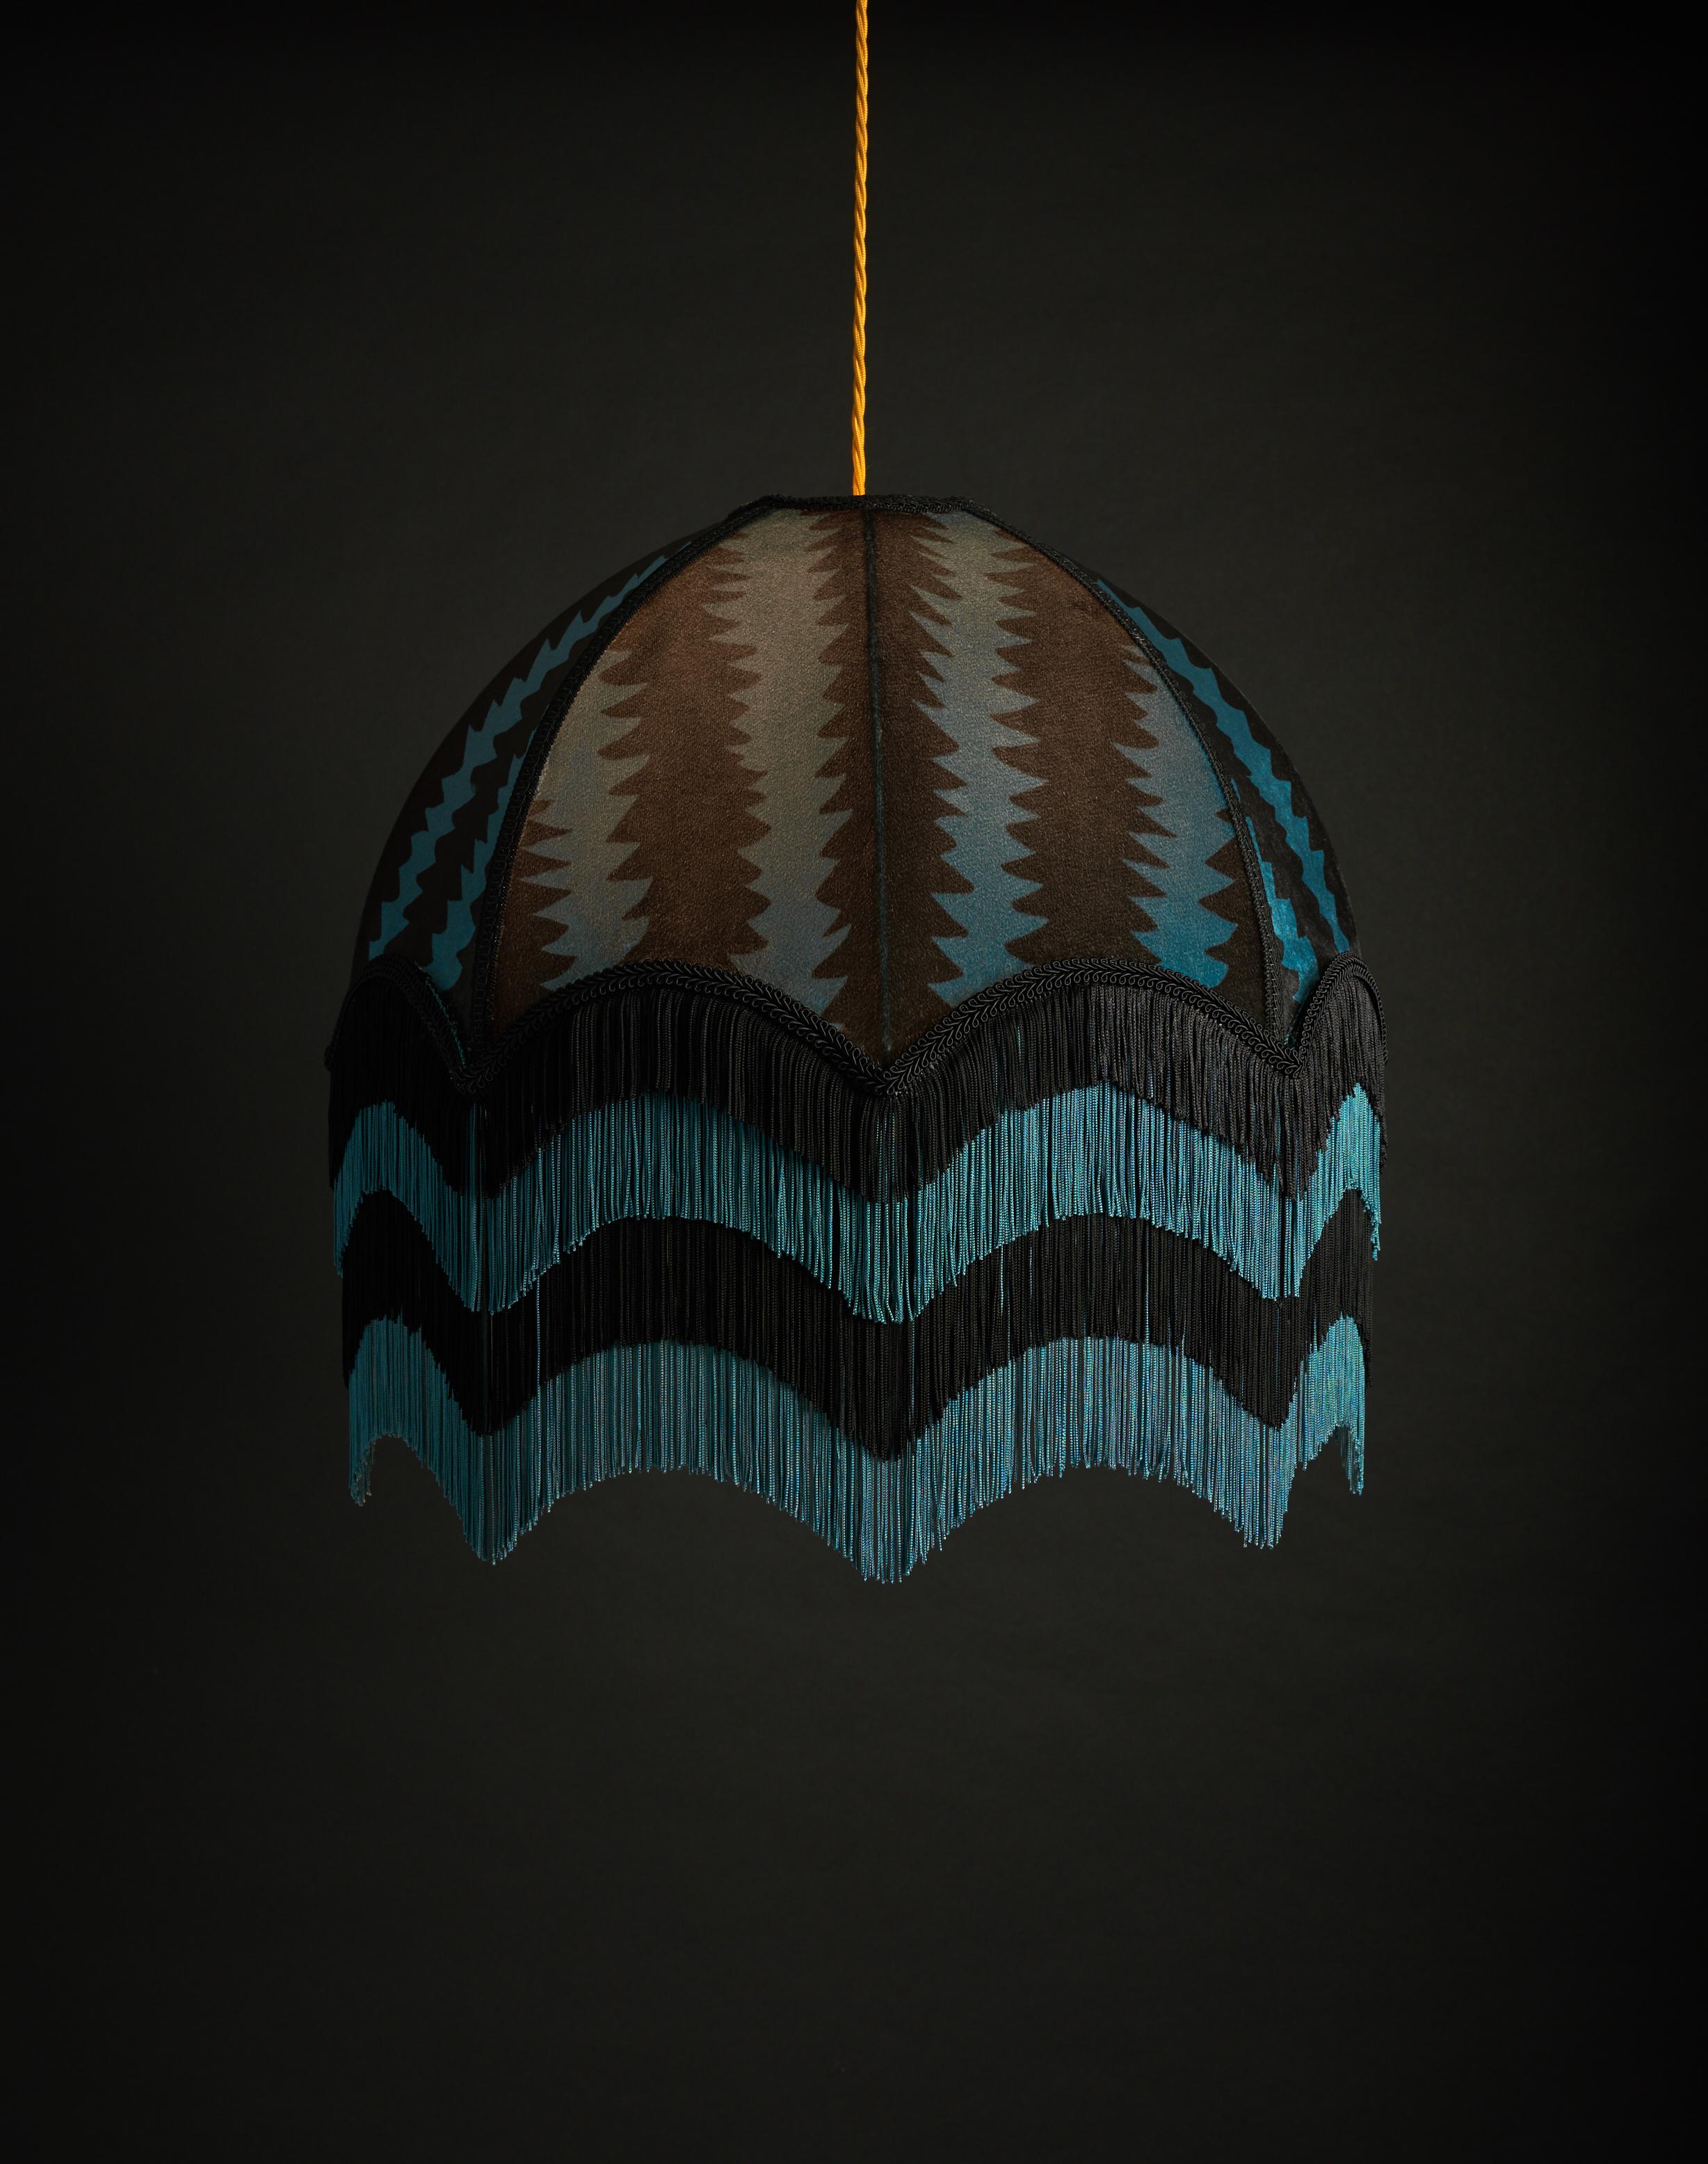 Fitz is a lively design in simple black and teal zigzag stripes, painted by Anna. The movement in this design enhances the ‘Jazz Age’ quality of this beautiful lampshade, as do the four layers of decadent, alternating fringe.

Anna Hayman lampshades